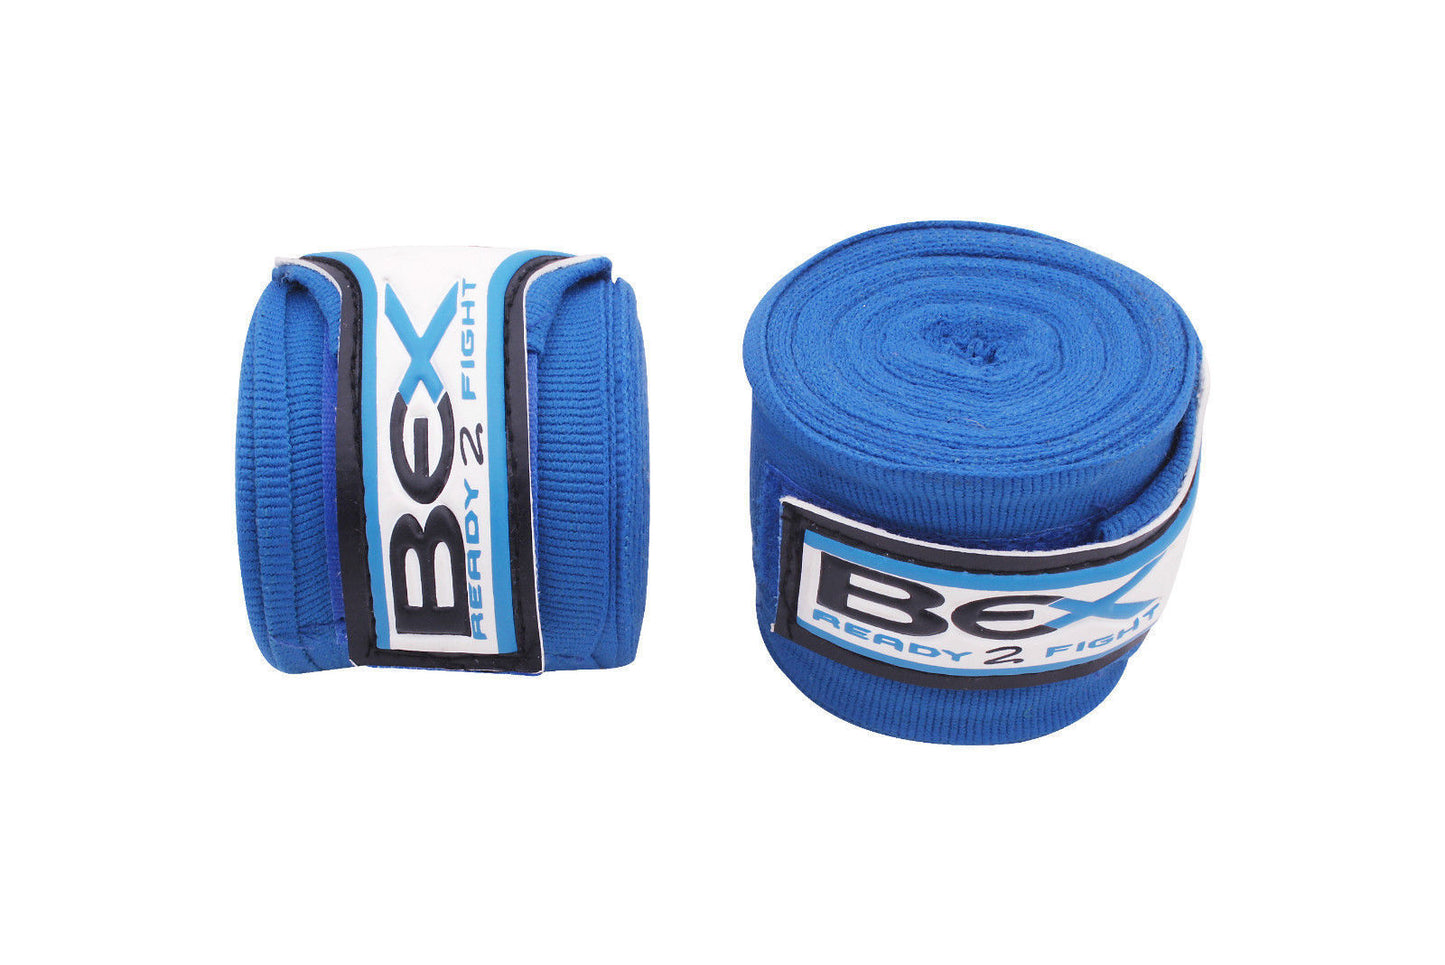 Premium 4.5-Meter Carbon Fiber Hand Wraps – Expertly Crafted with Wide Velcro Closure for Professional Performance